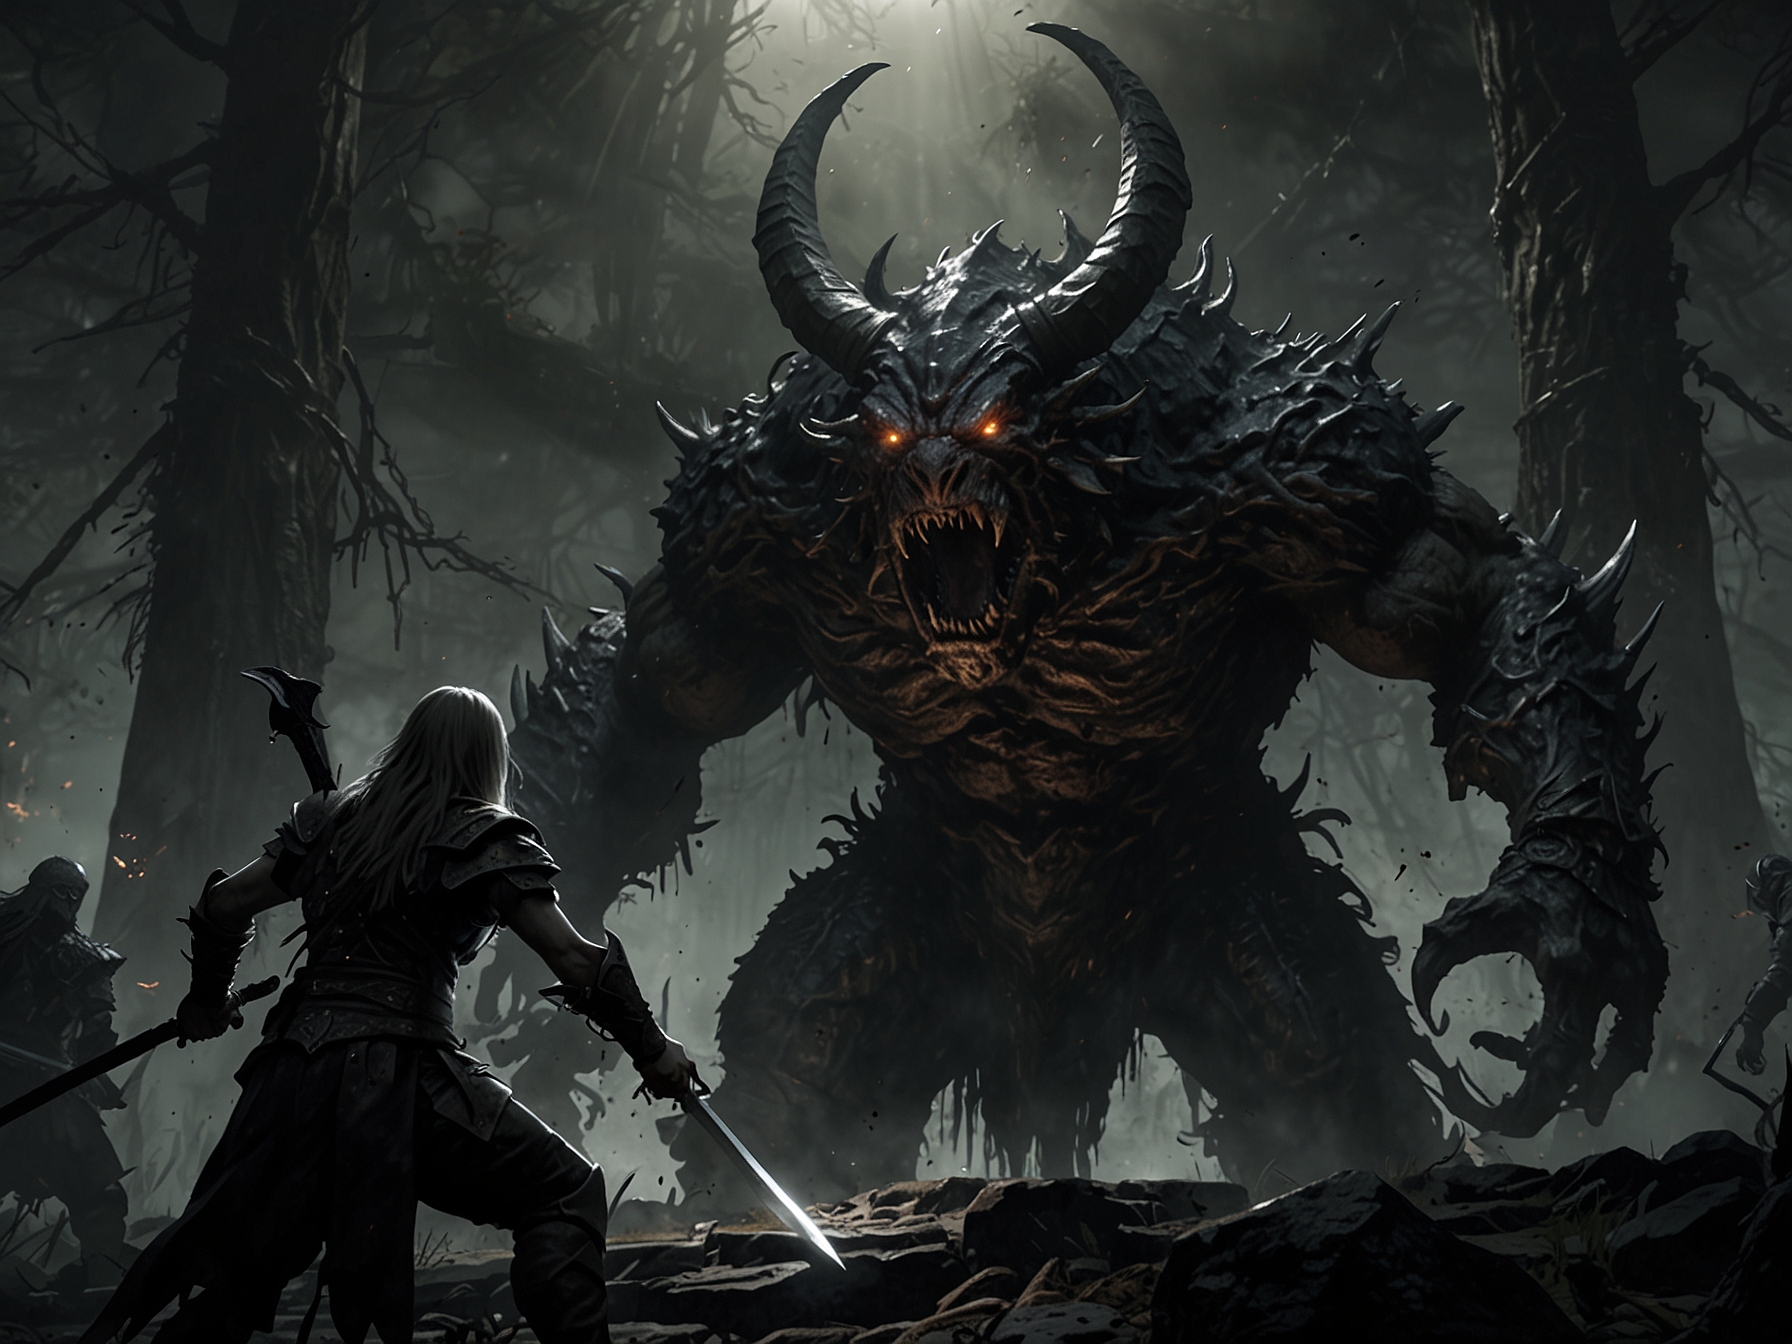 Multiplayer cooperative gameplay scene in Elden Ring: Shadow of the Erdtree showing players battling a colossal boss, demonstrating teamwork and dynamic combat strategies.